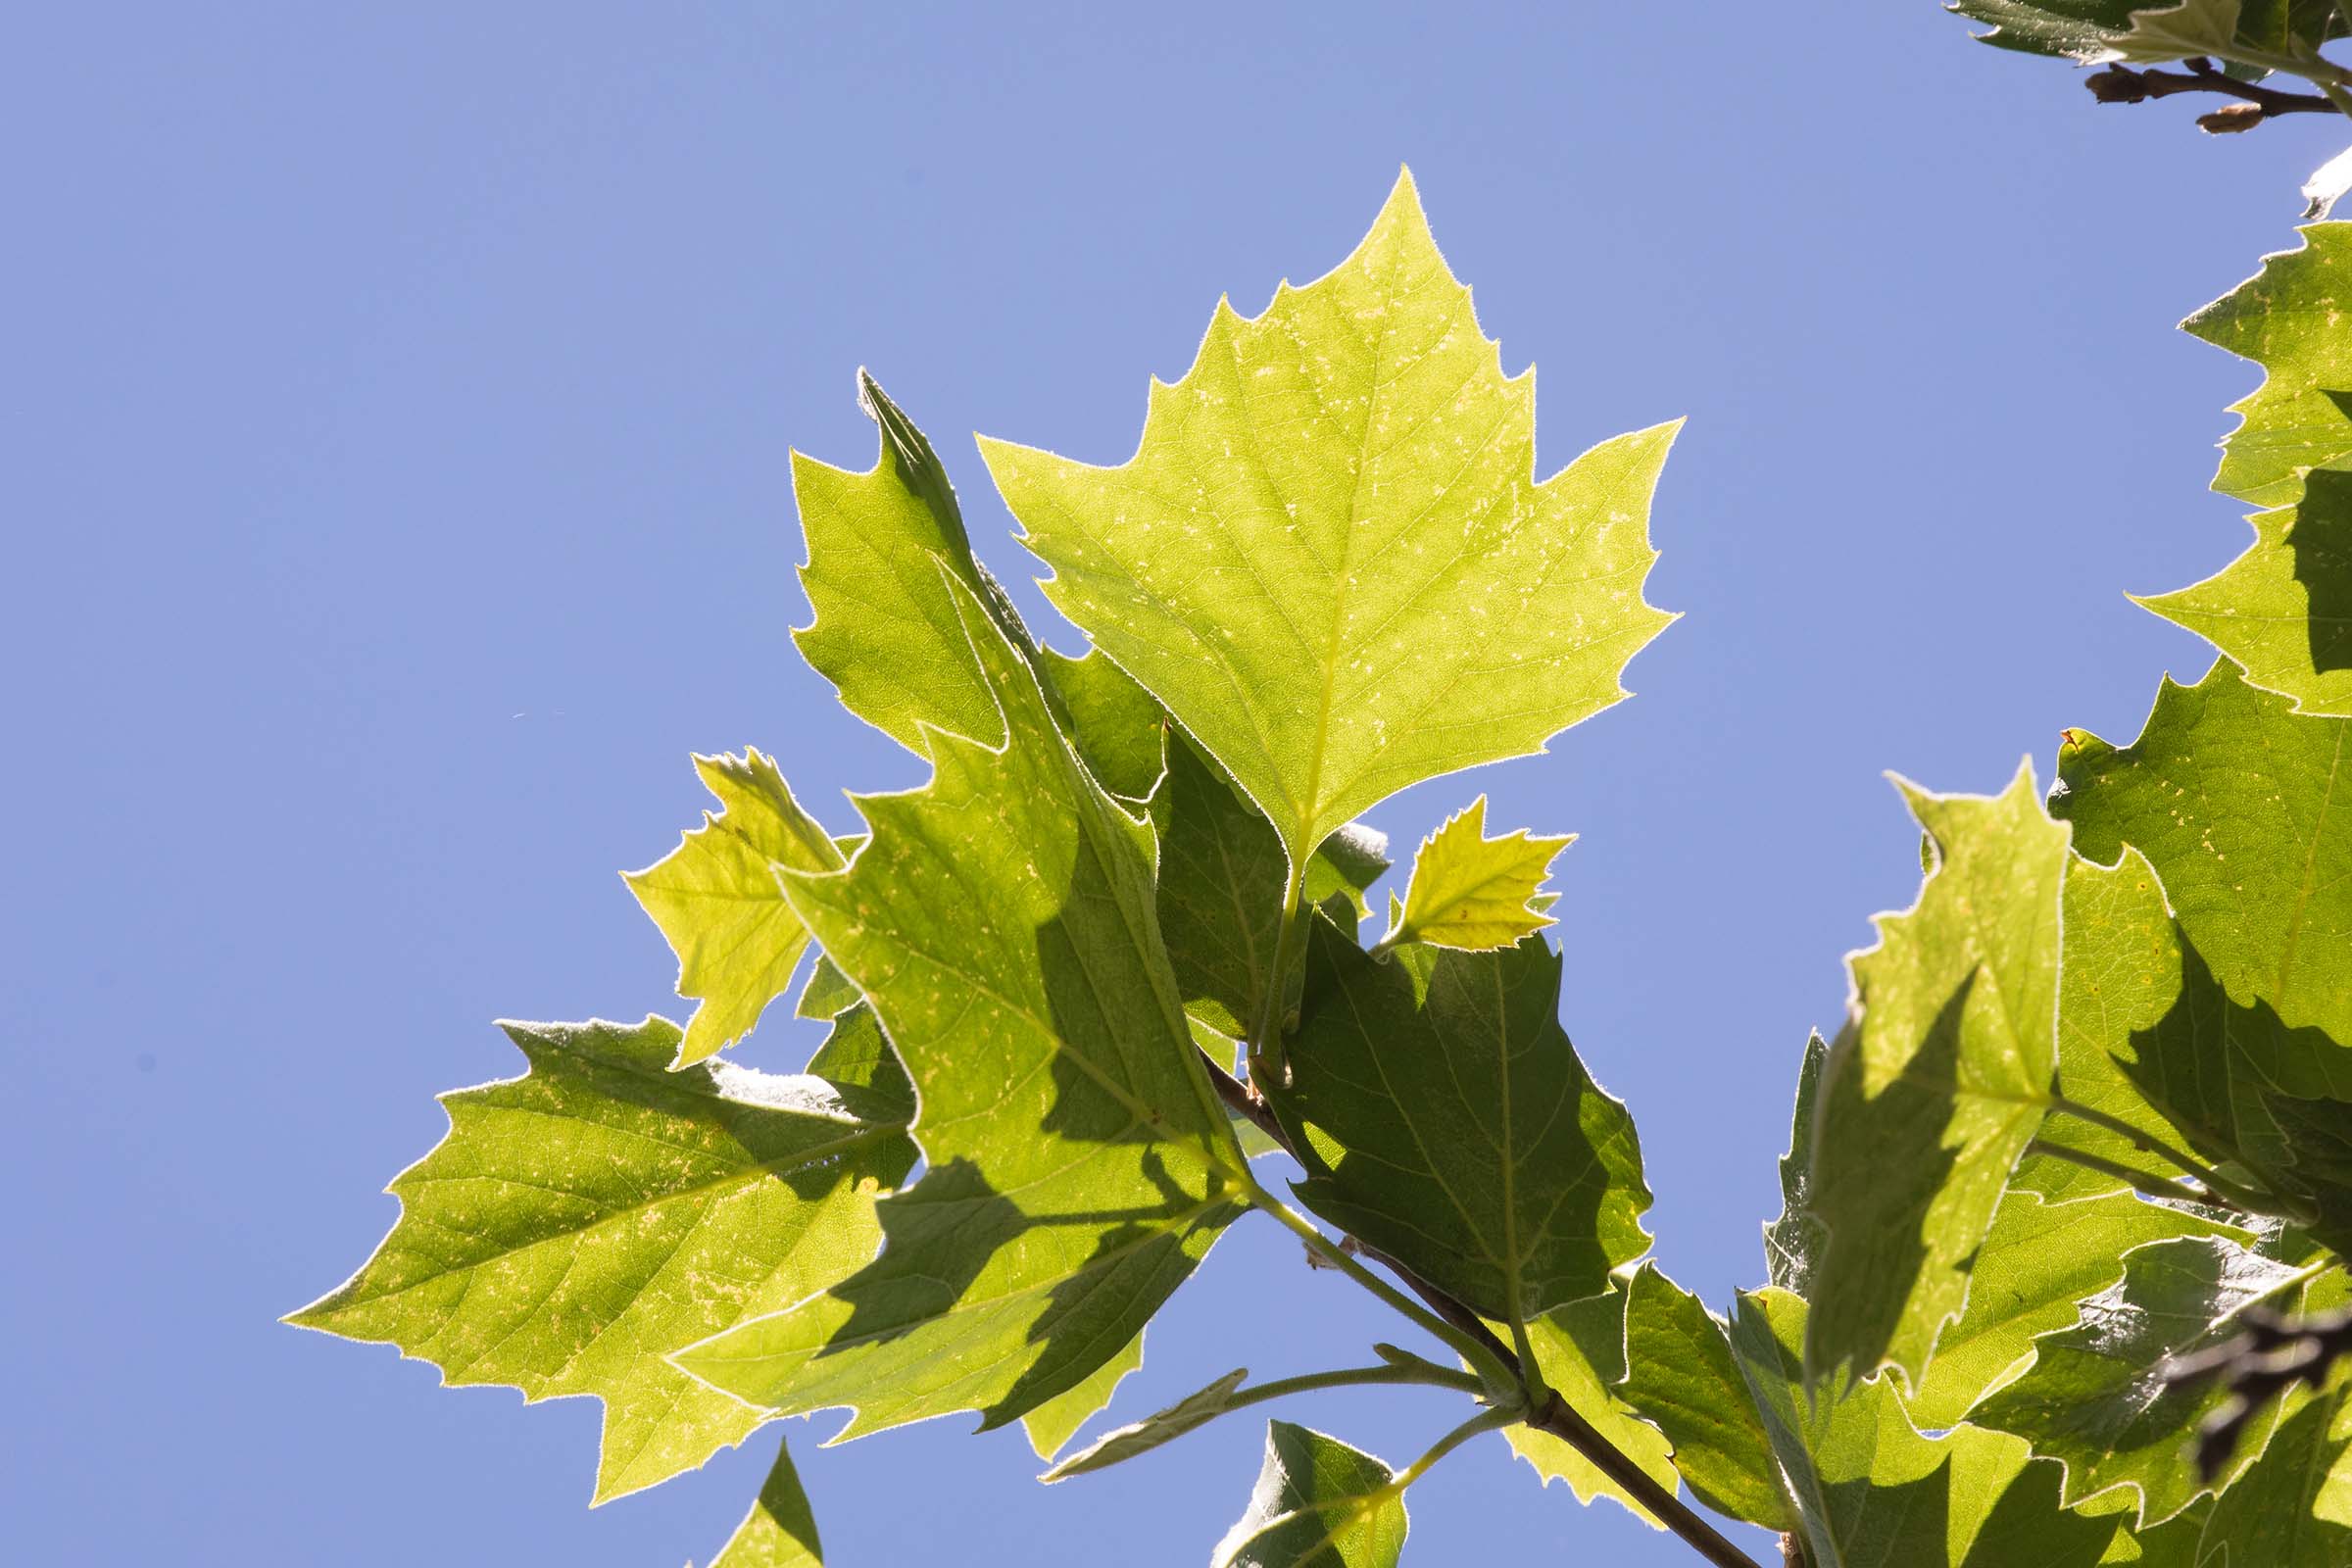 The leaves of the London Plane Tree have three pointed sections with jagged edges